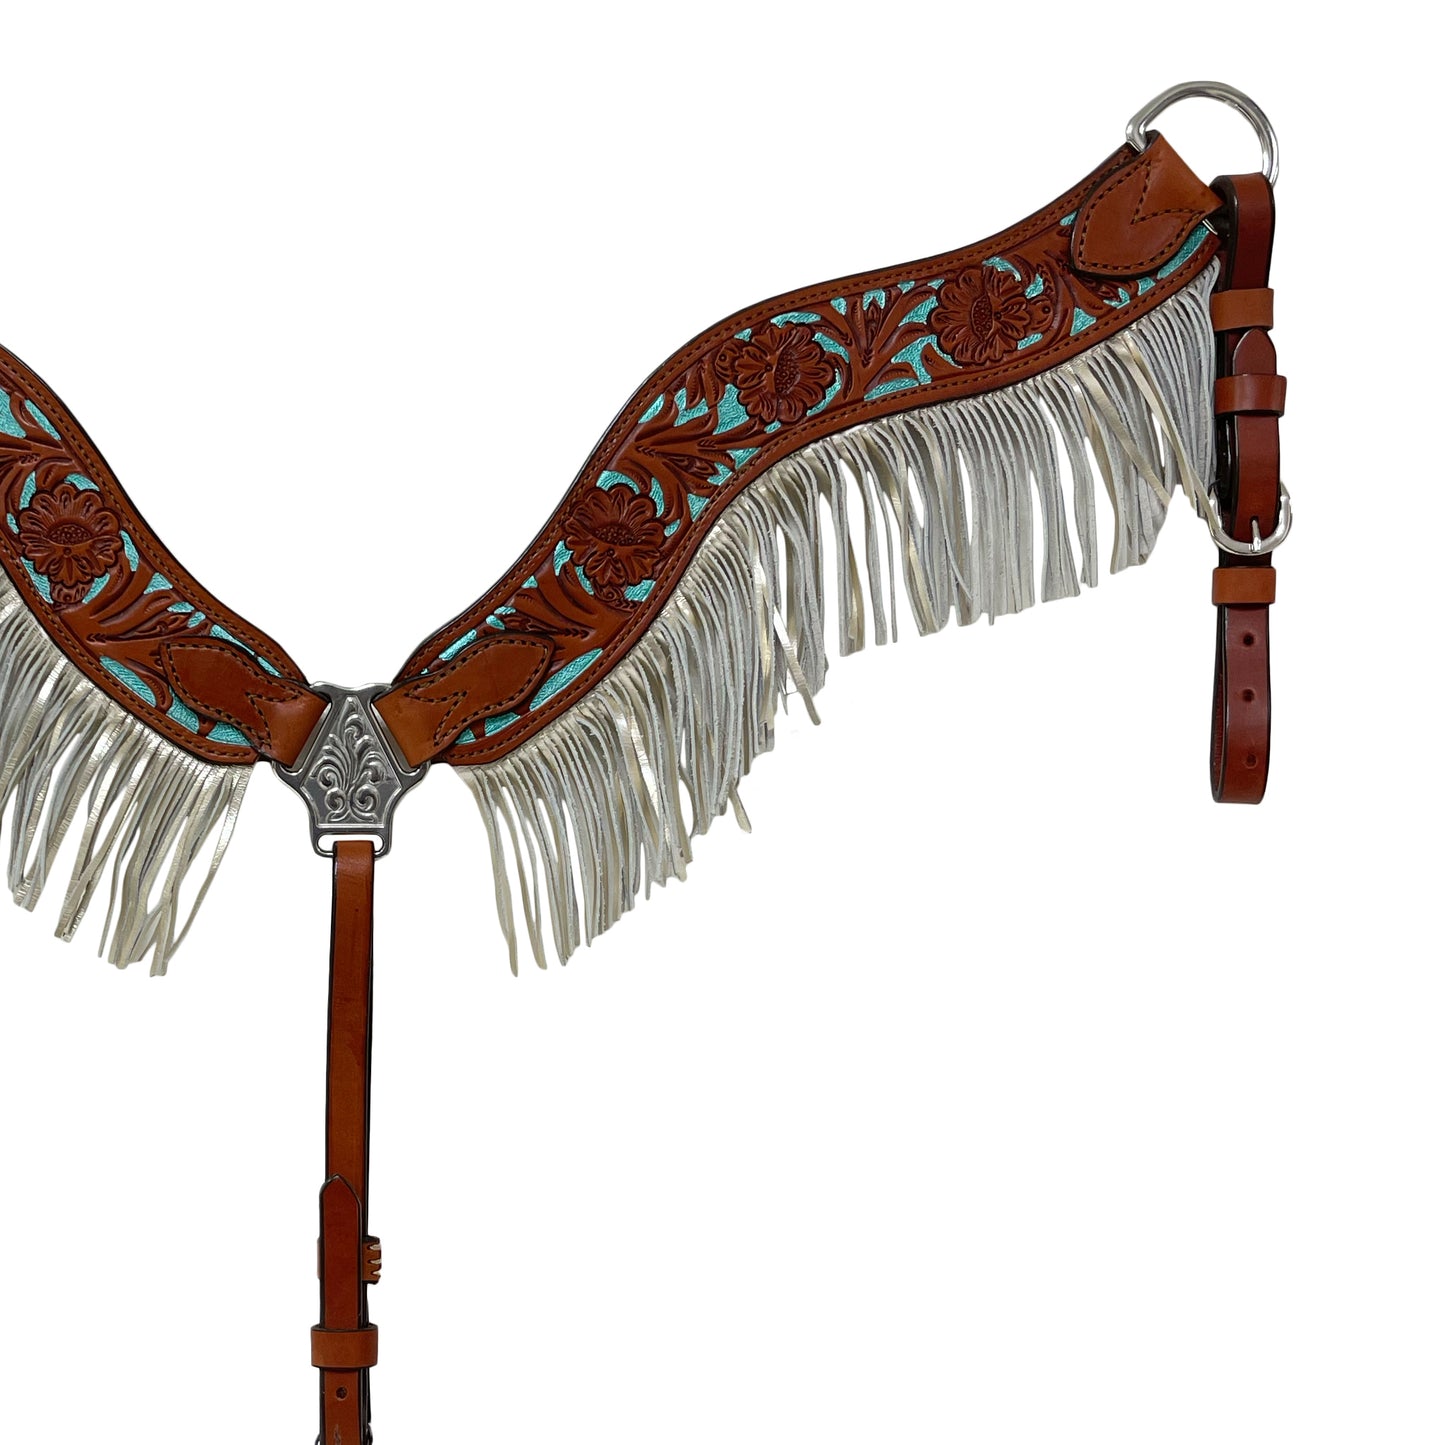 2-1/2" Wave breast collar toast leather floral tooled with turquoise shimmer background paint and fringe.